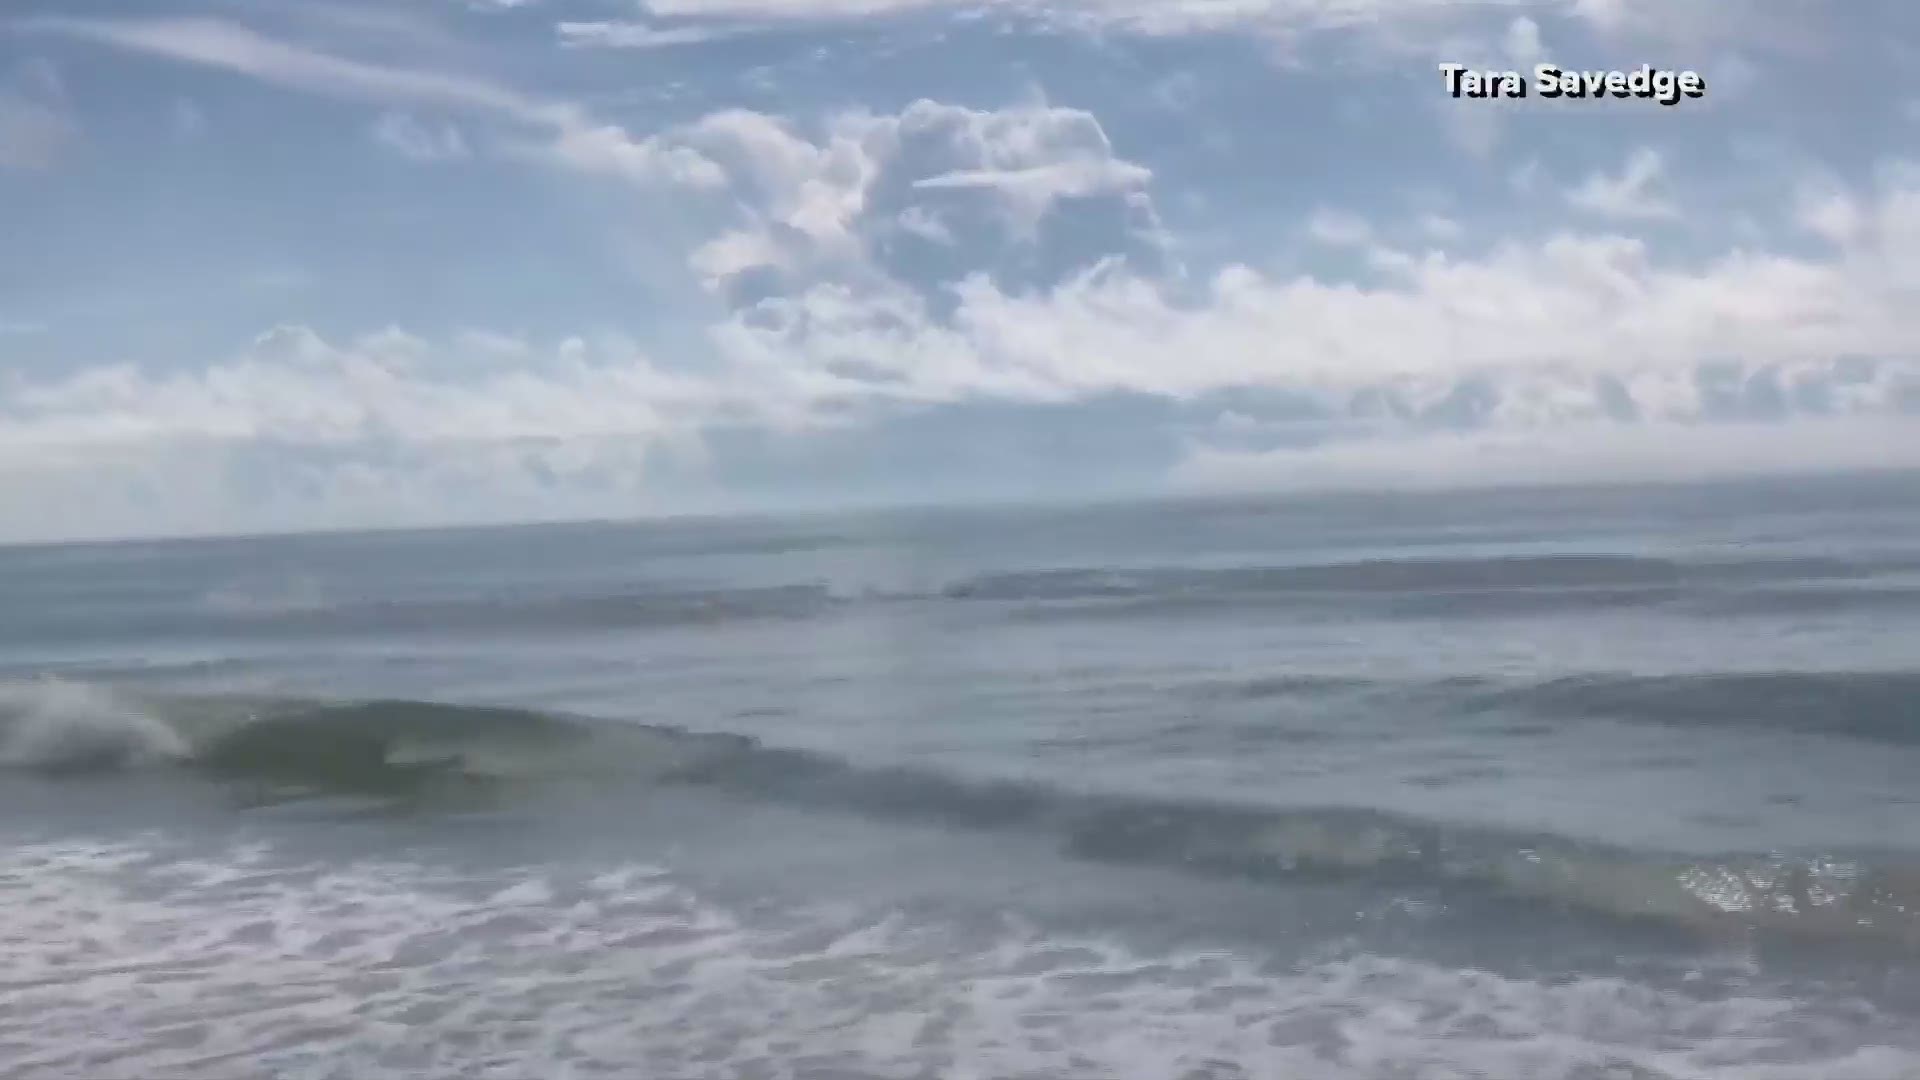 A family on vacation in Myrtle Beach captured quite a sight: a group of sharks feeding on fish right along the shoreline. More: https://on.wltx.com/2ZDlw12